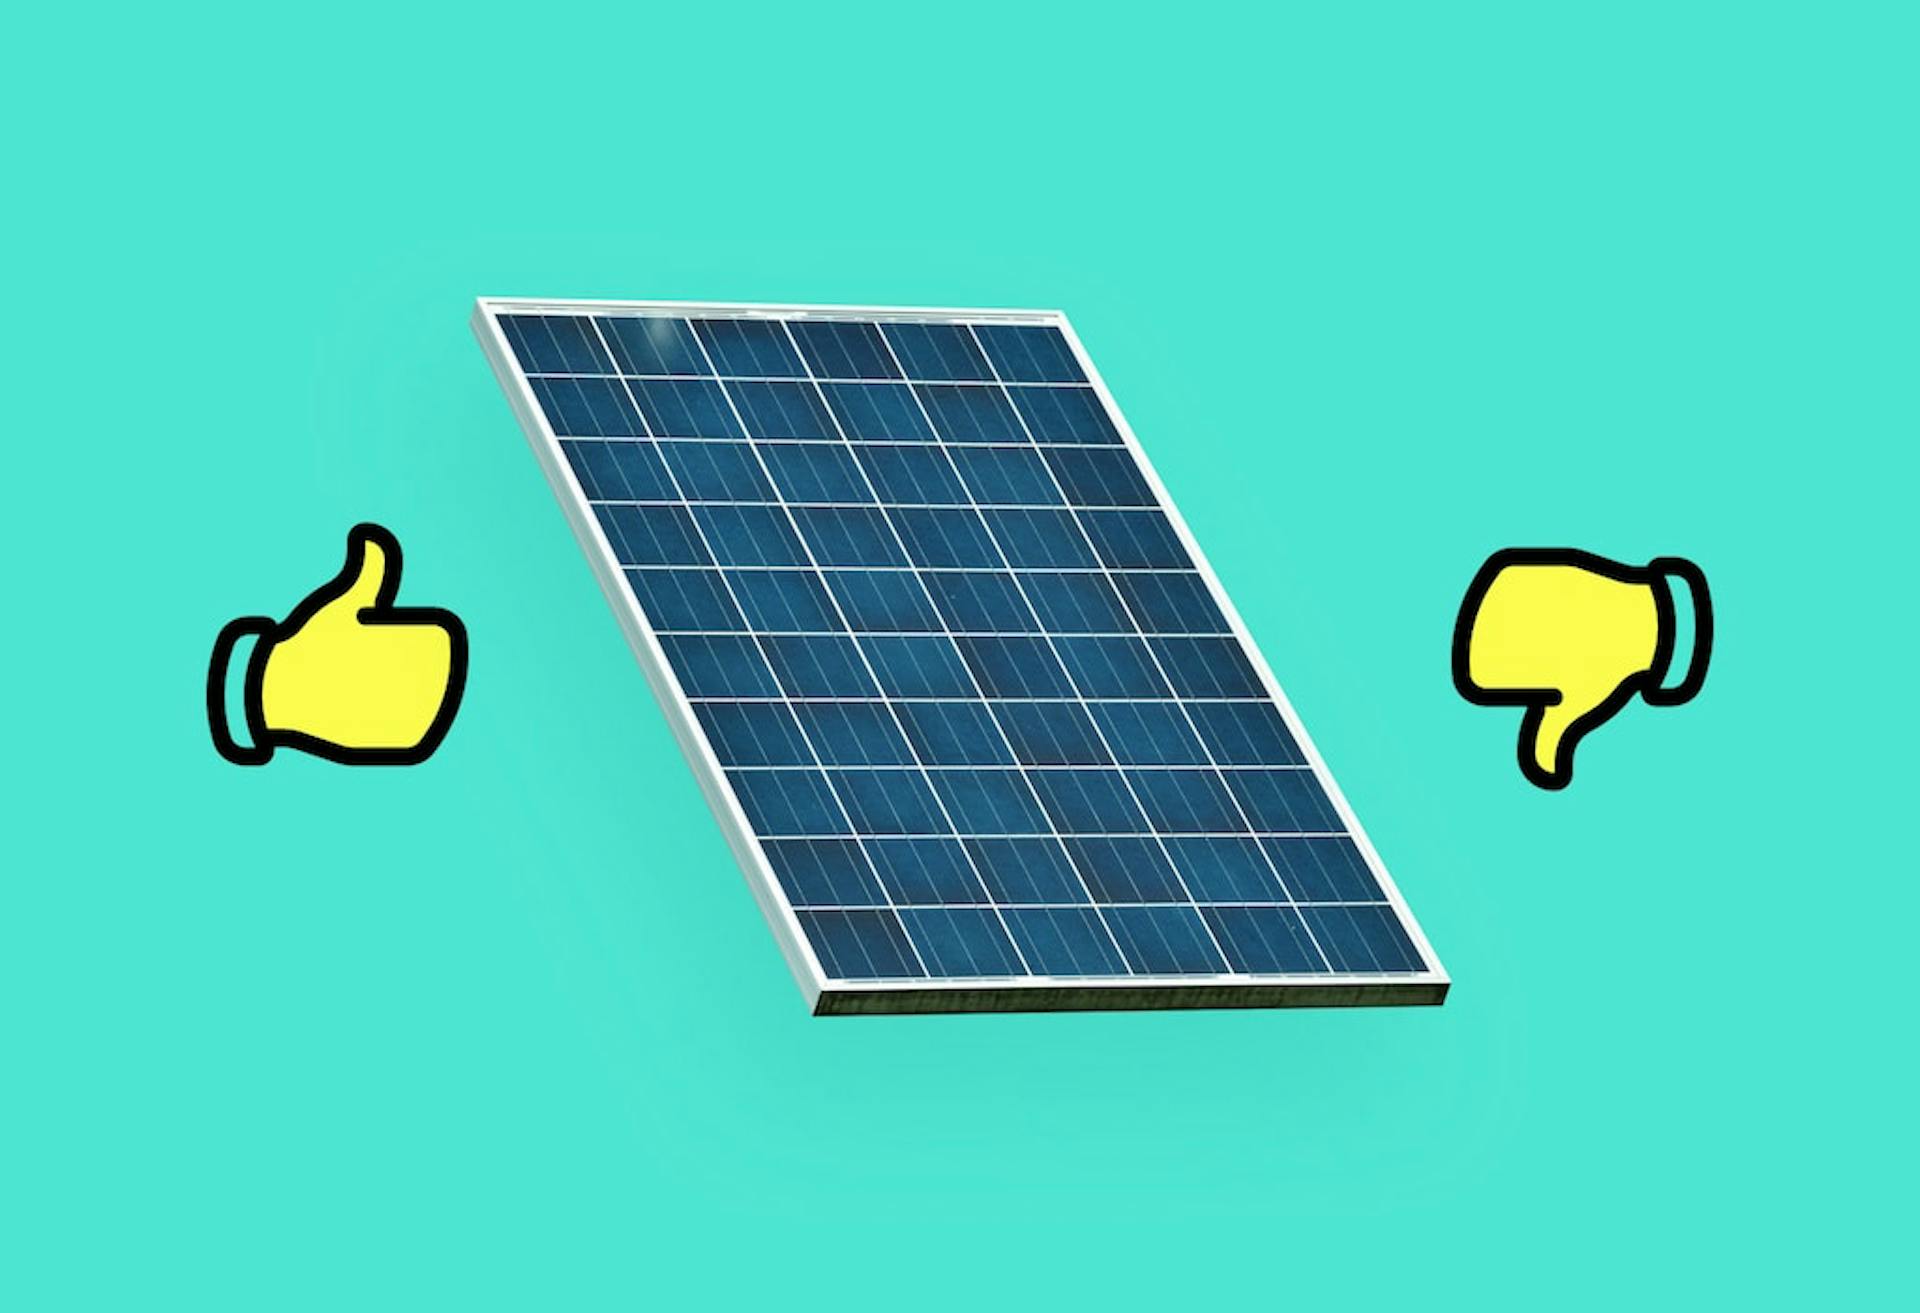 A polycrystalline solar panel with a thumbs up and a thumbs down either side of it